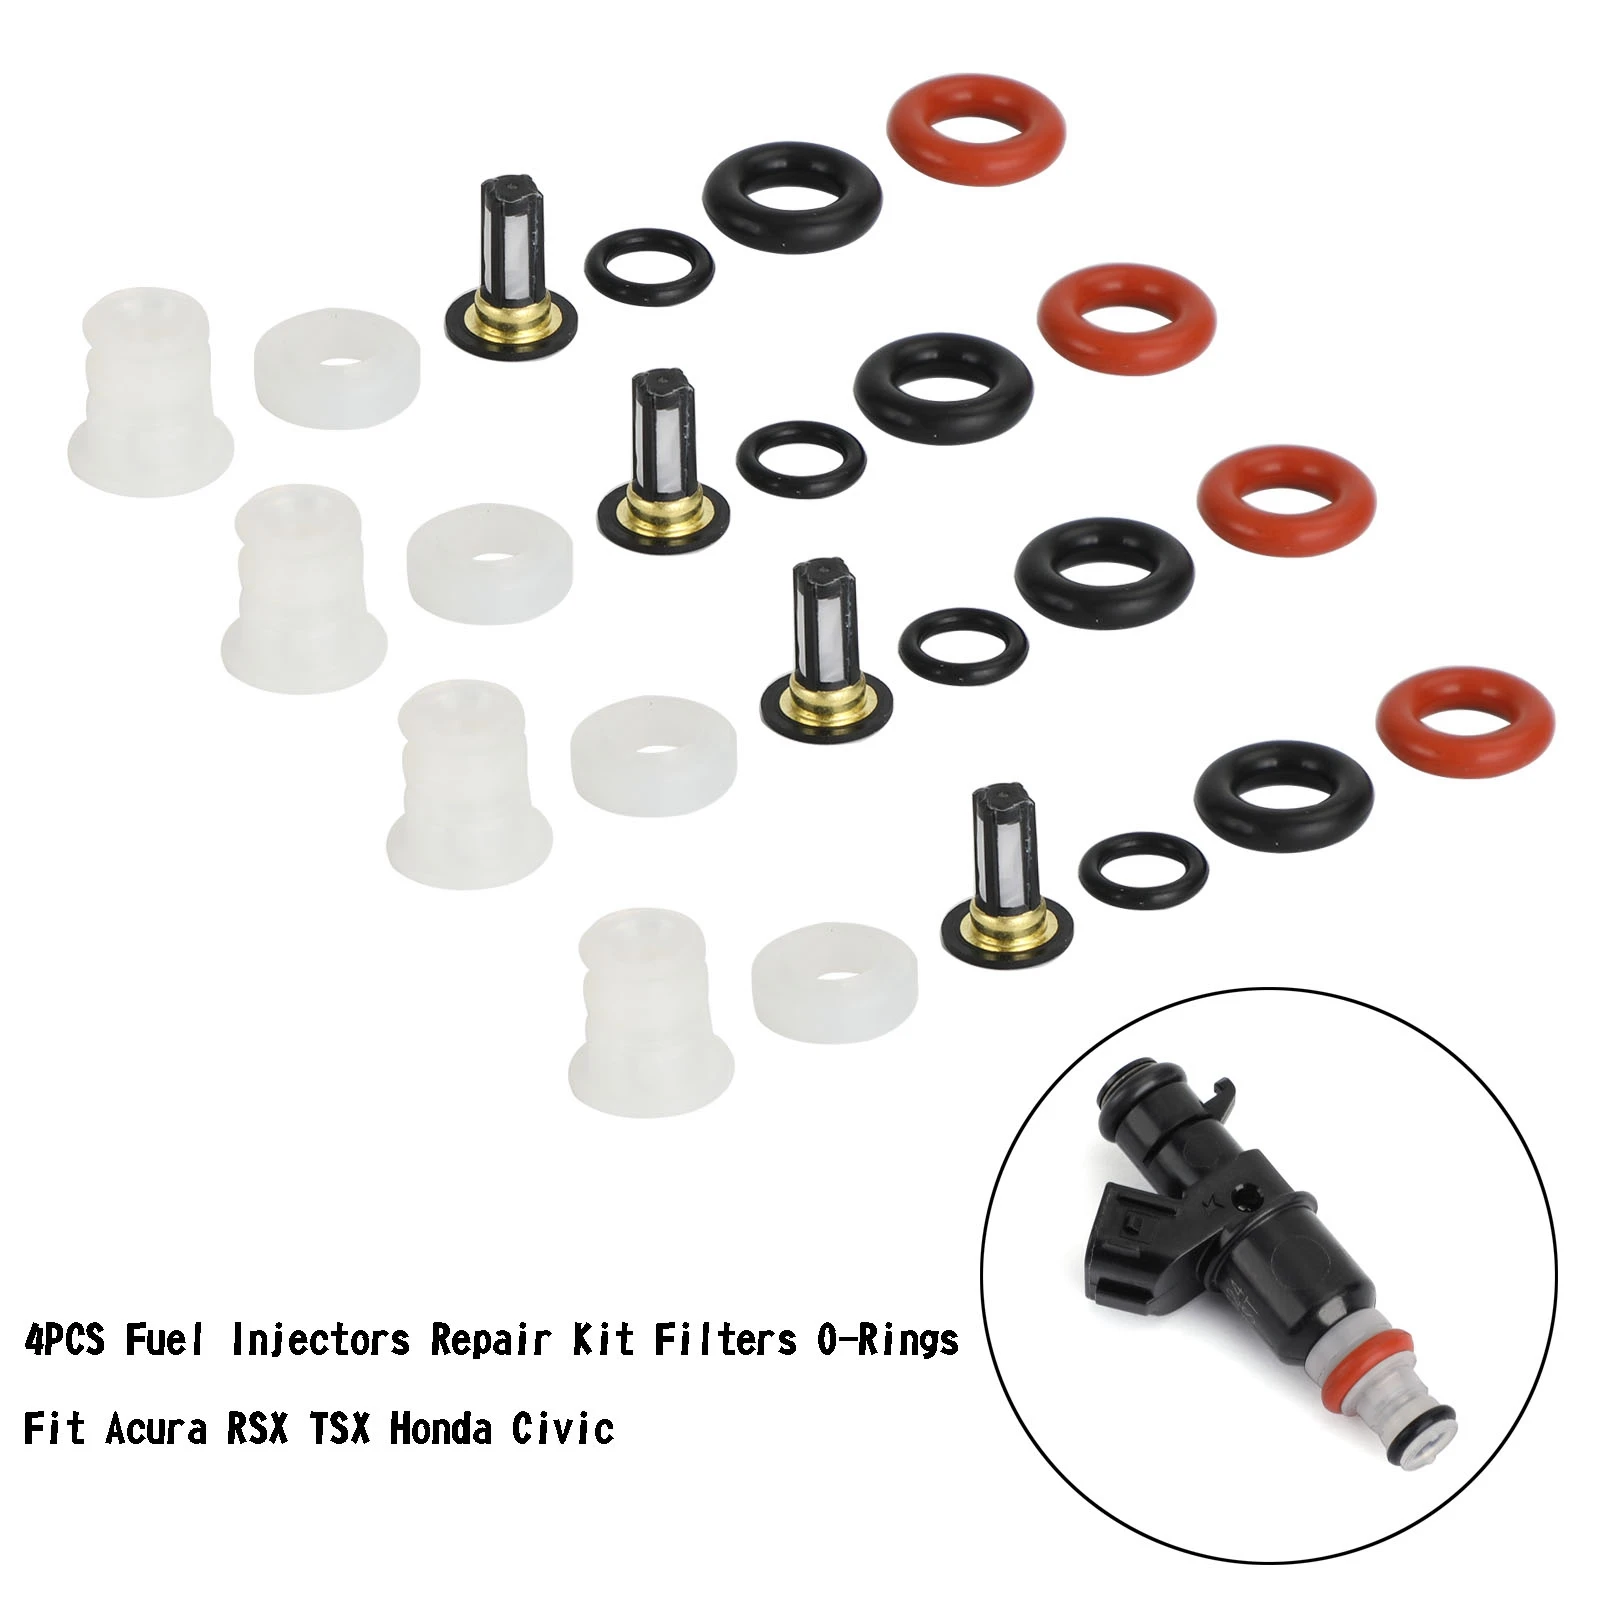 Topteng 4PCS Fuel Injectors Repair Kit Filters O-Rings Fit For Acura RSX TSX Honda Civic